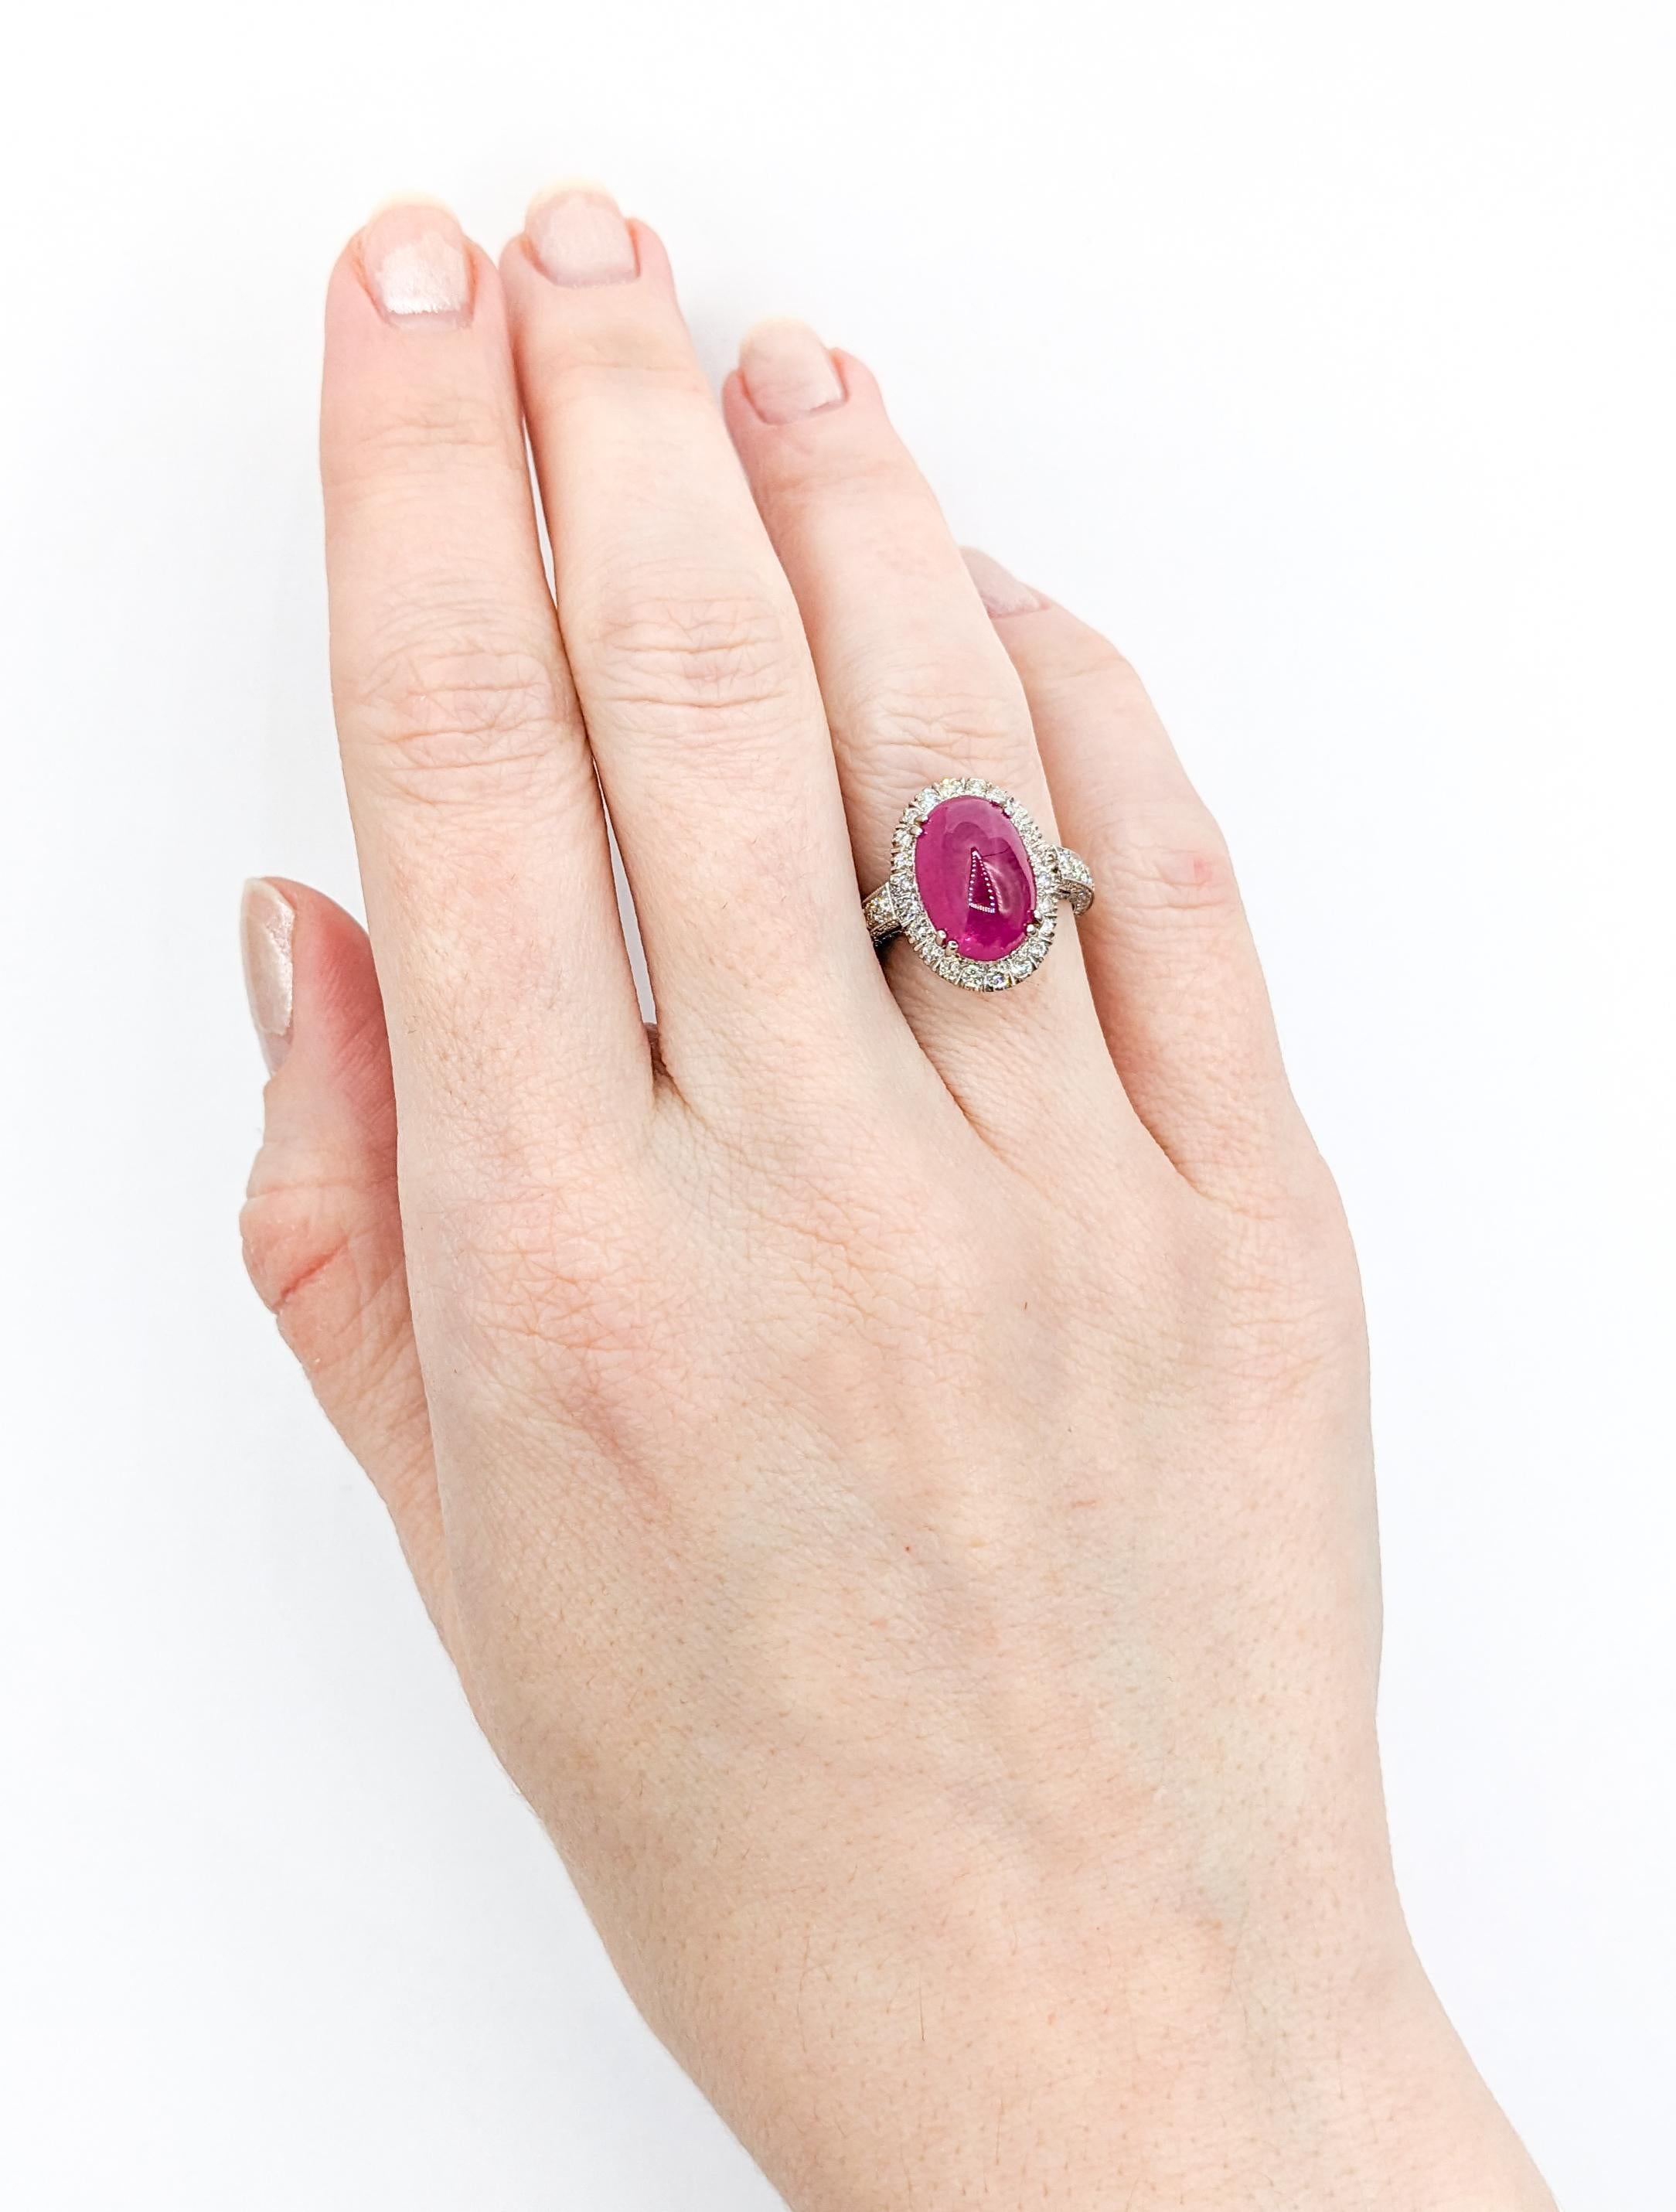 Stunning Natural Ruby Cabochon Ring with Round Diamonds in 18Kt White Gold

This lovely 18kt White Gold Ring features a stunning 12.4 x 8.5mm natural ruby cabochon centerpiece. A glittering diamond halo and shoulders with a .50ctw perfectly enhance